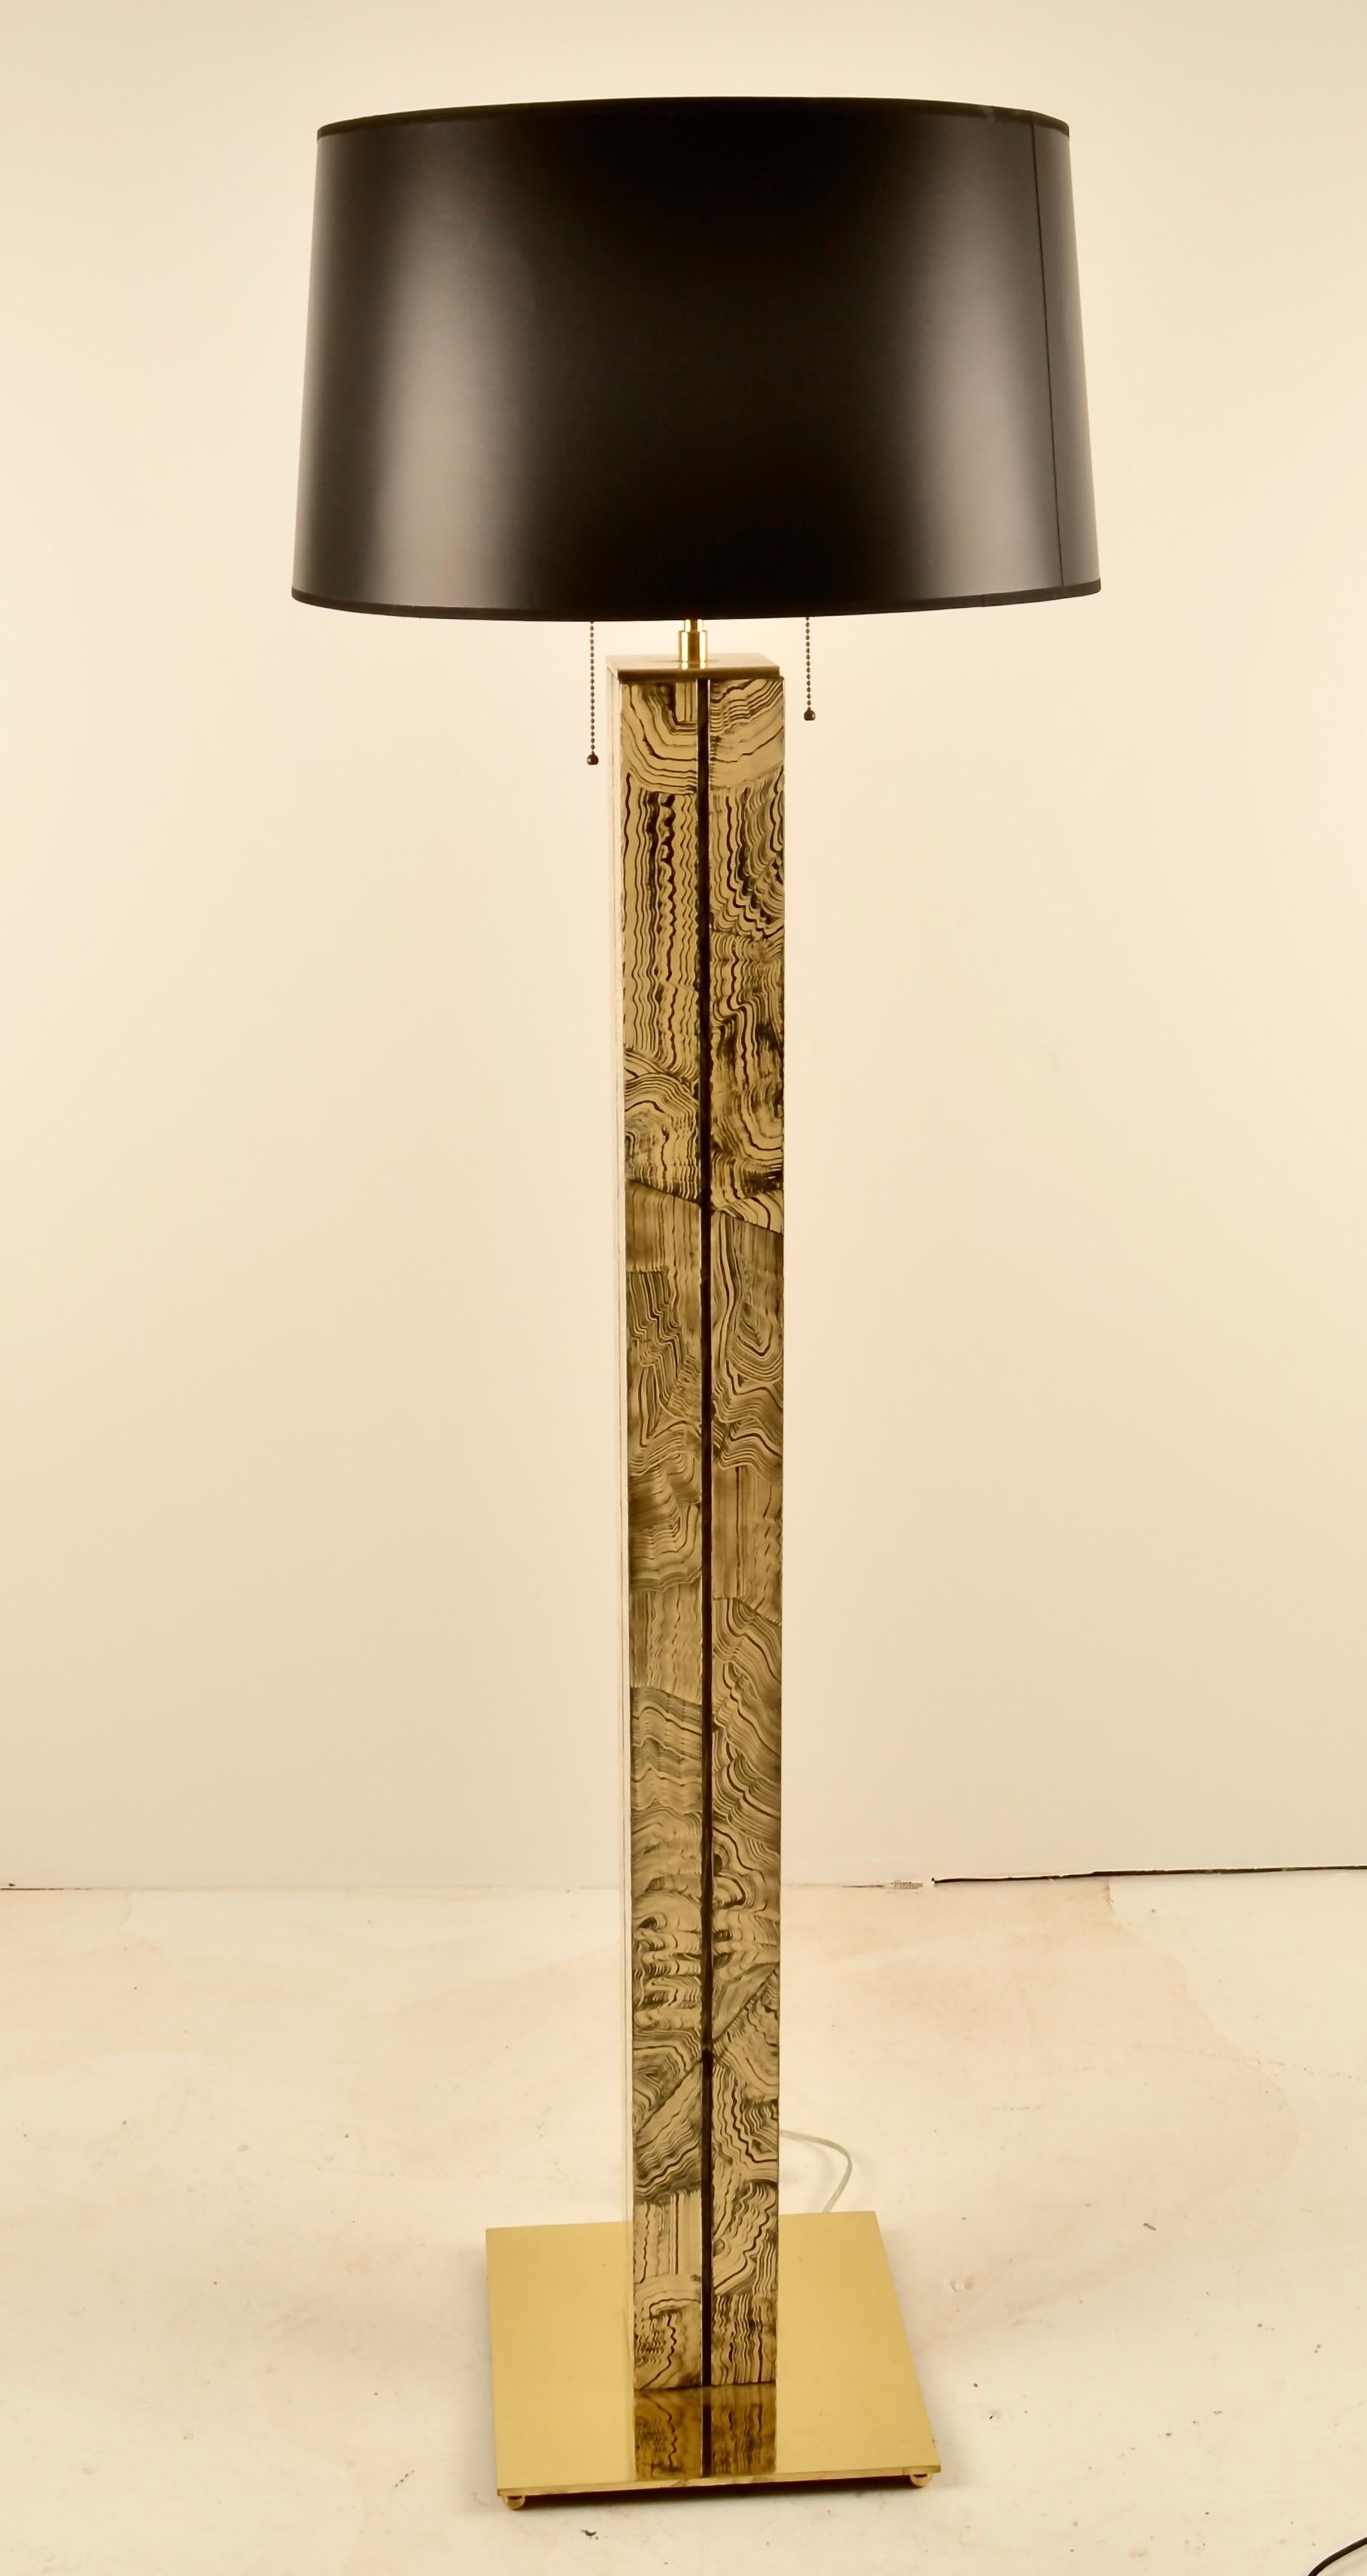 Dramatically hand painted floor lamp with solid brass base and lamp fittings. All new wiring and new shade. Brass fittings have been newly polished and lacquered. The lamp measures 12' X 12' at the base and is 62.25